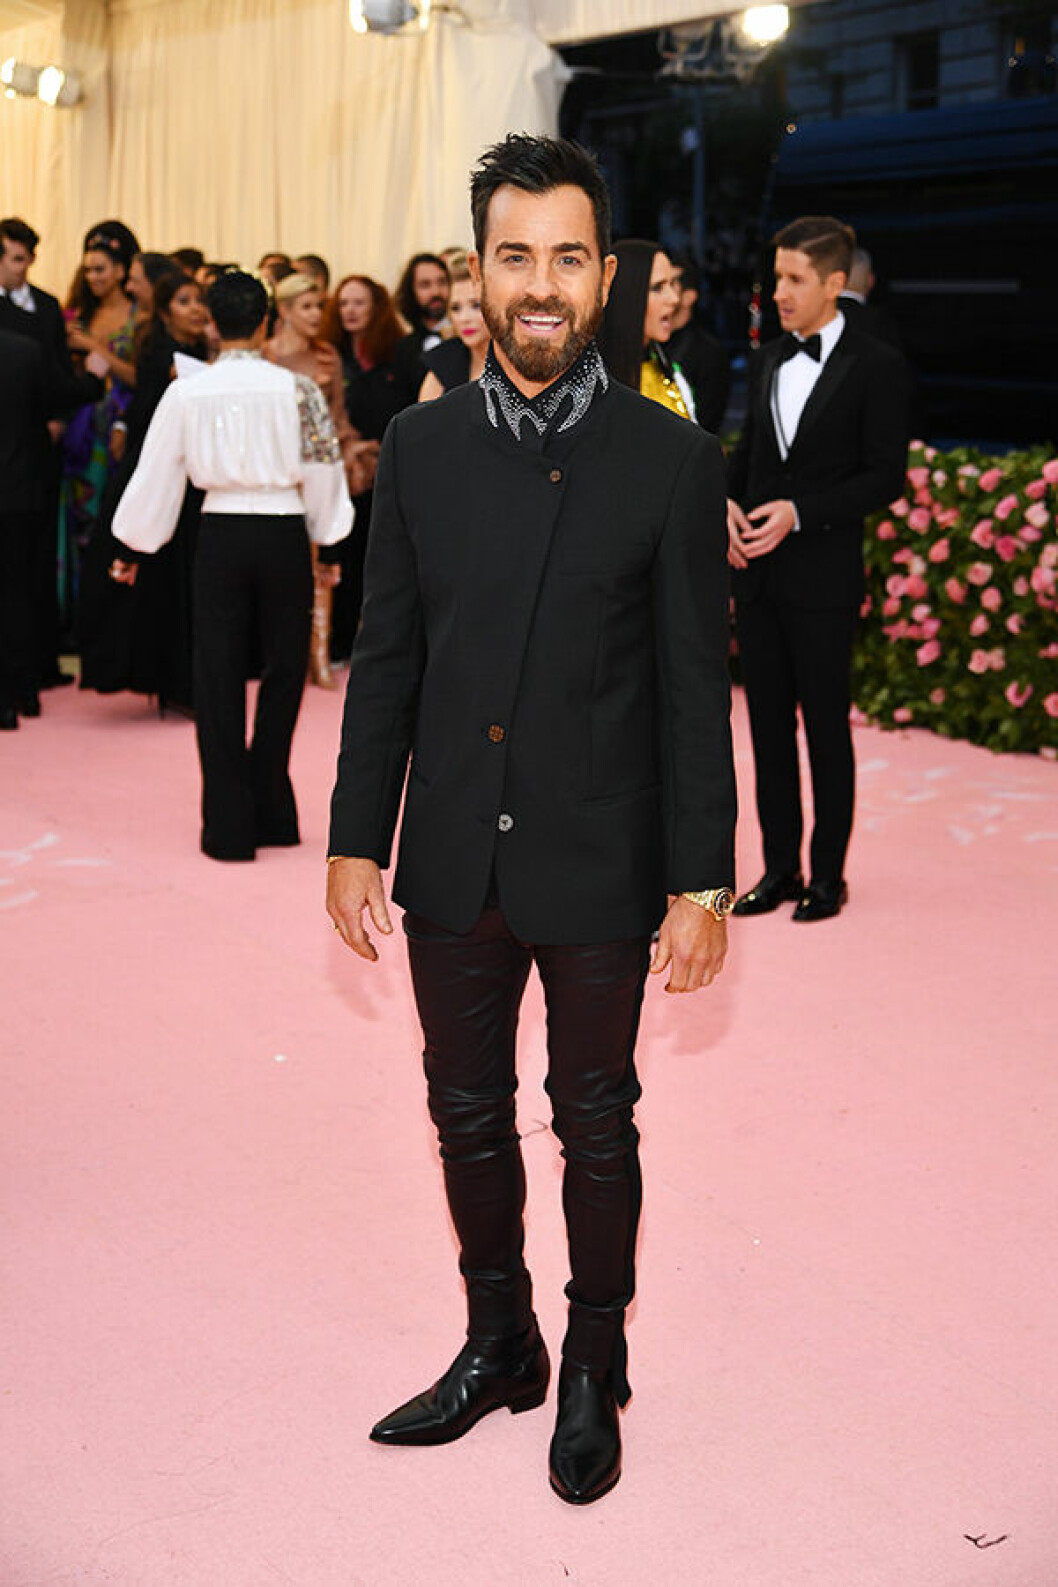 NEW YORK, NEW YORK &#8211; MAY 06: Justin Theroux attends The 2019 Met Gala Celebrating Camp: Notes on Fashion at Metropolitan Museum of Art on May 06, 2019 in New York City. (Photo by Dimitrios Kambouris/Getty Images for The Met Museum/Vogue)